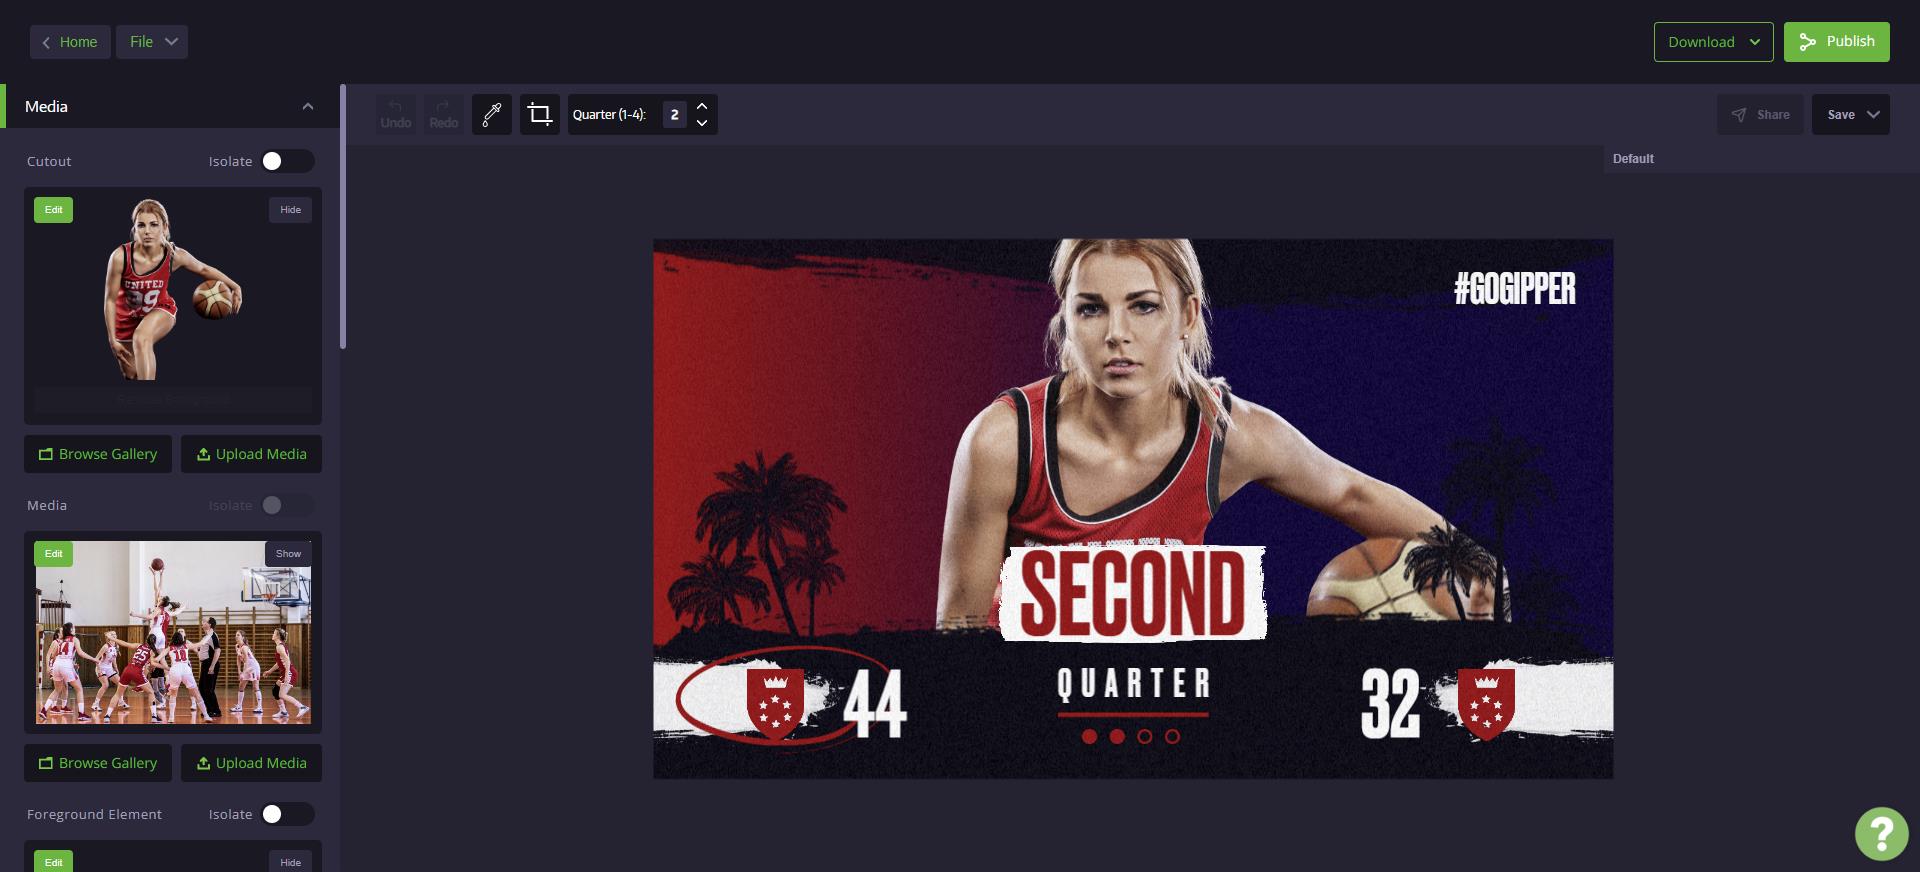 template editor showing scoreboard graphic where user can change color, text, and images to match their branding
